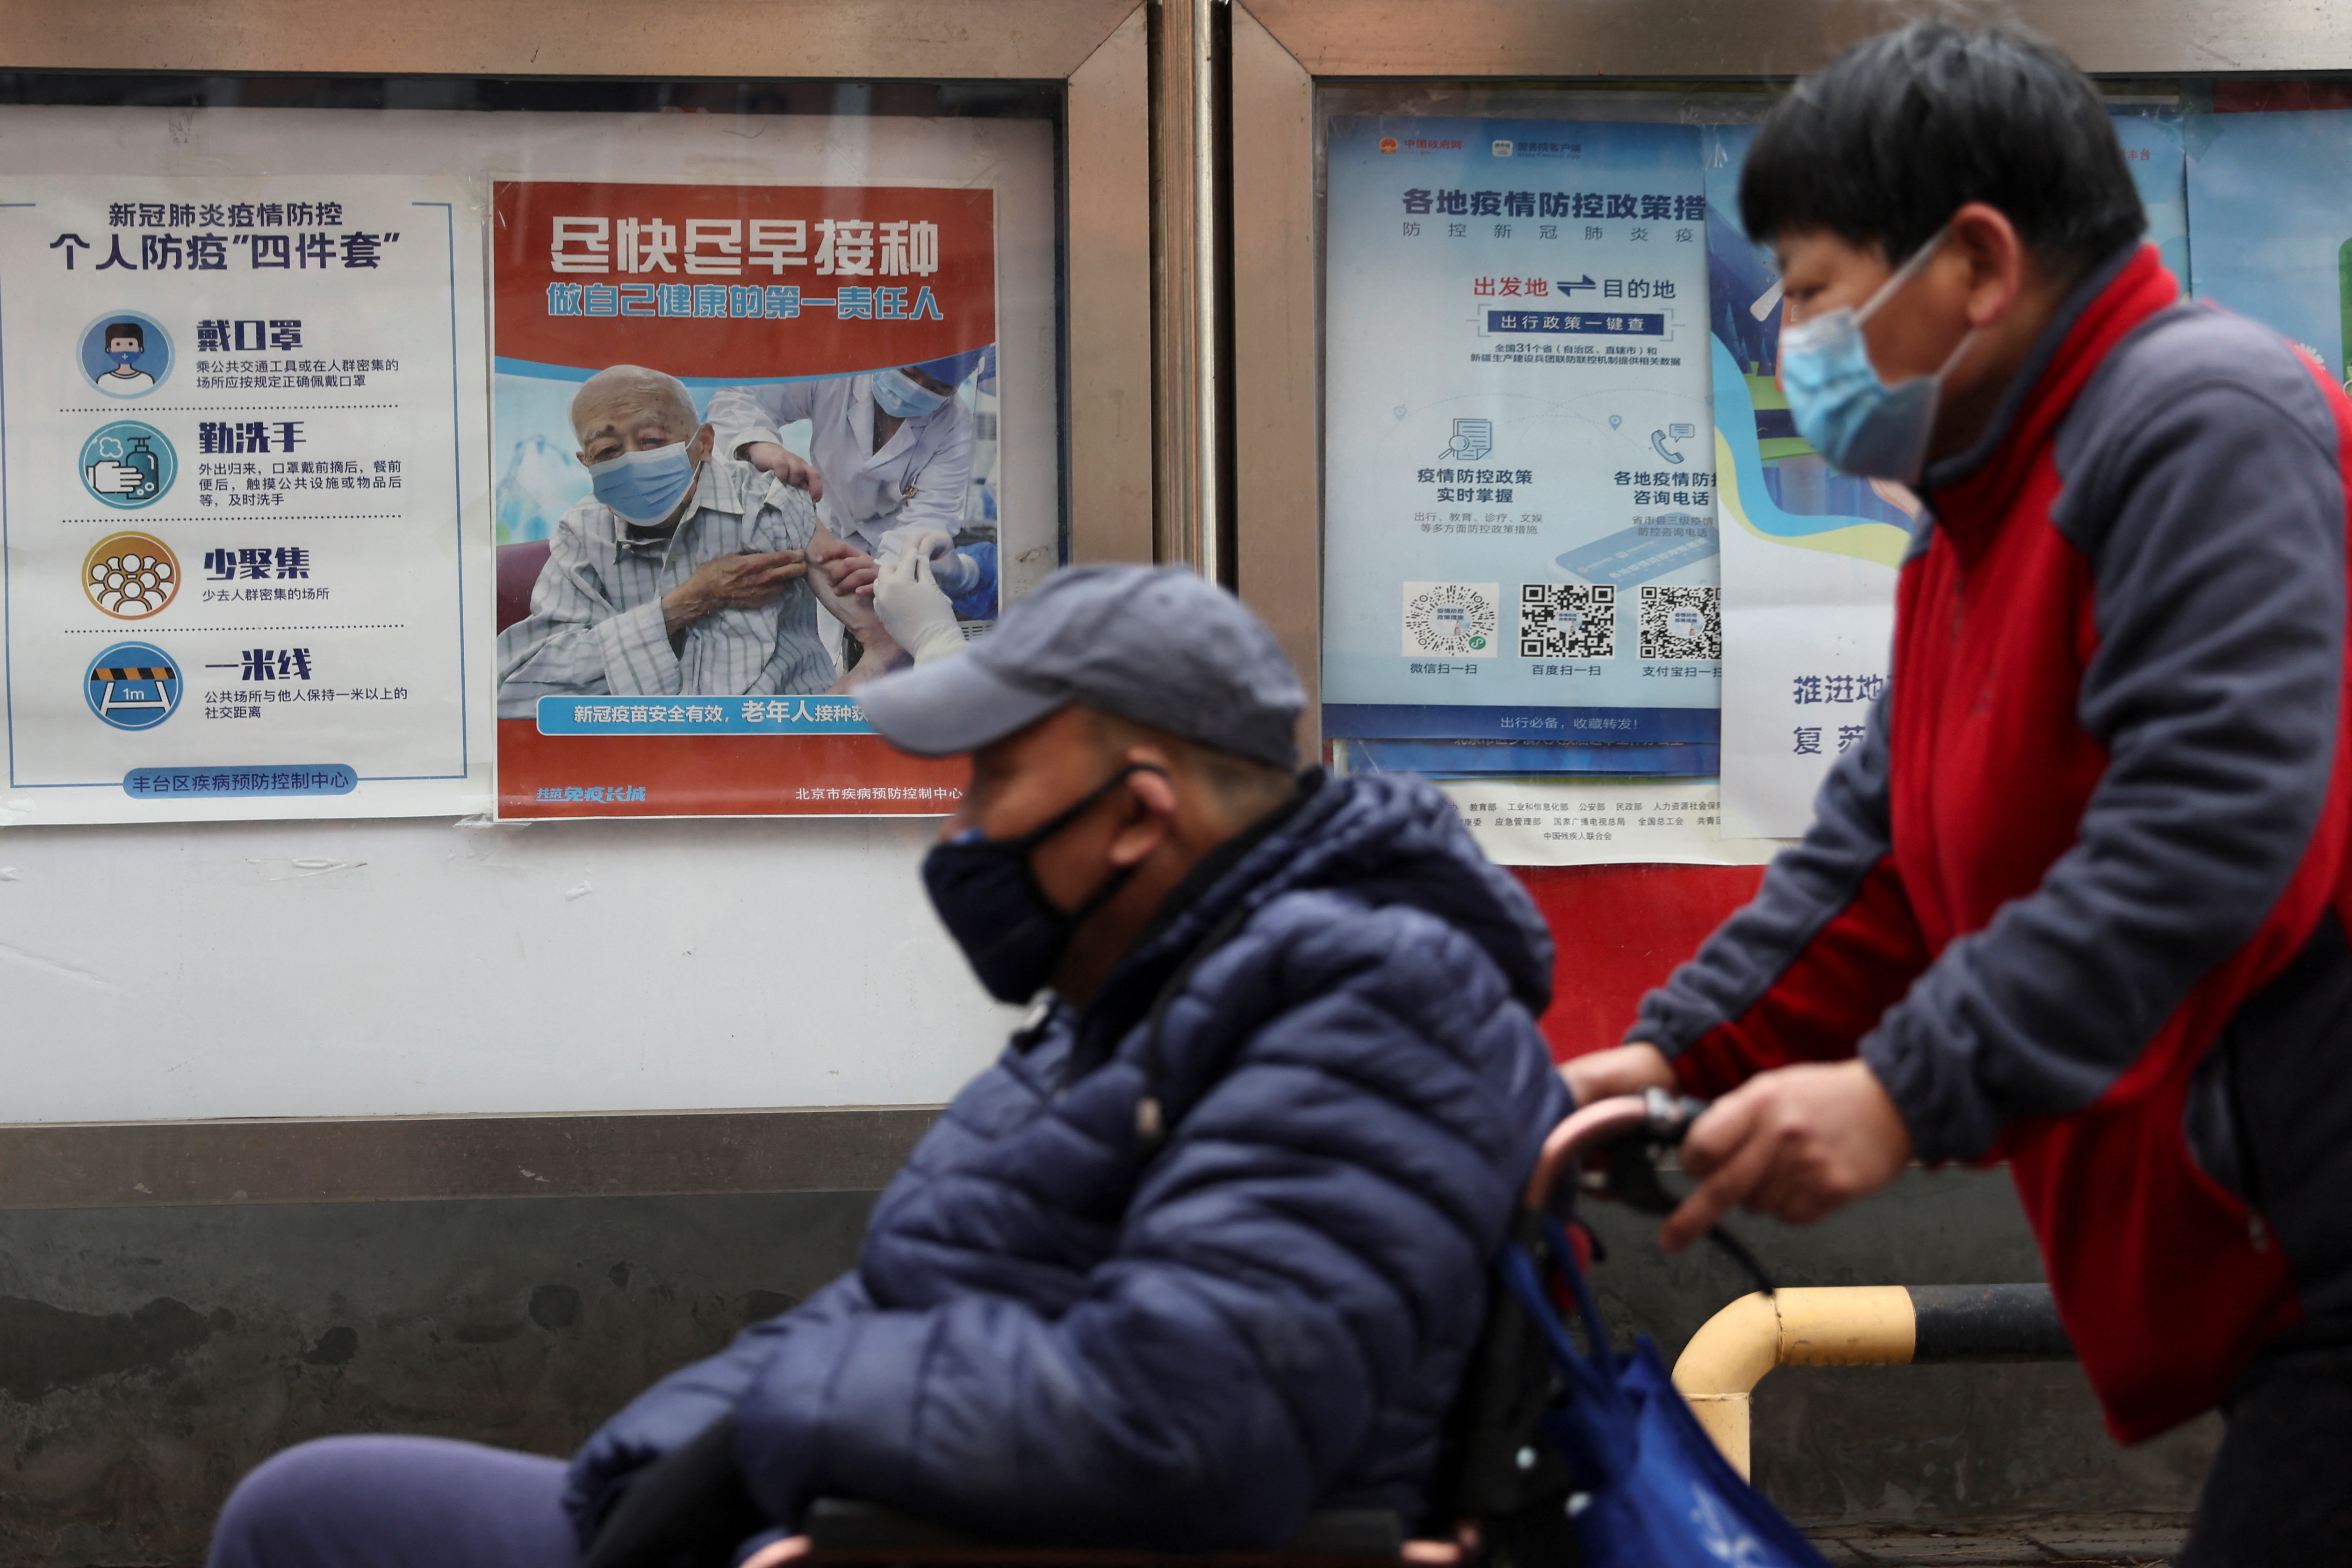 People pass by a poster encouraging elderly people to get vaccinated against COVID-19, in Beijing